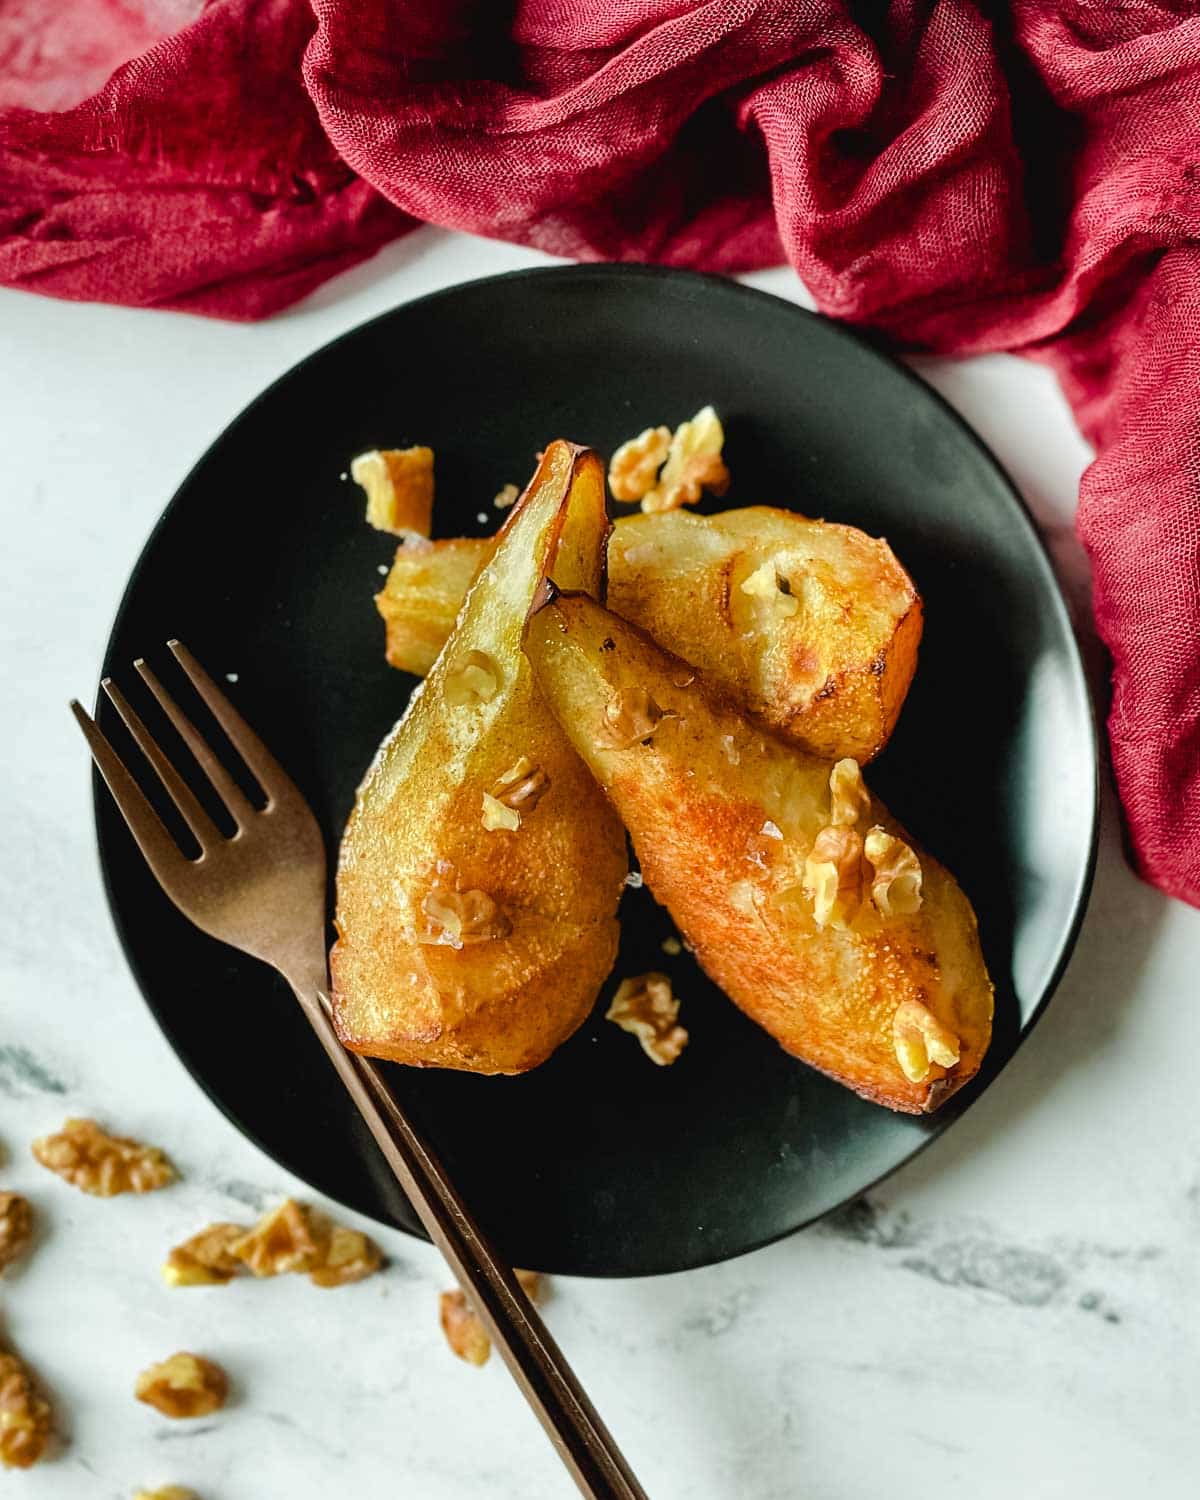 Air fryer pears sit on a black plate topped with walnuts.